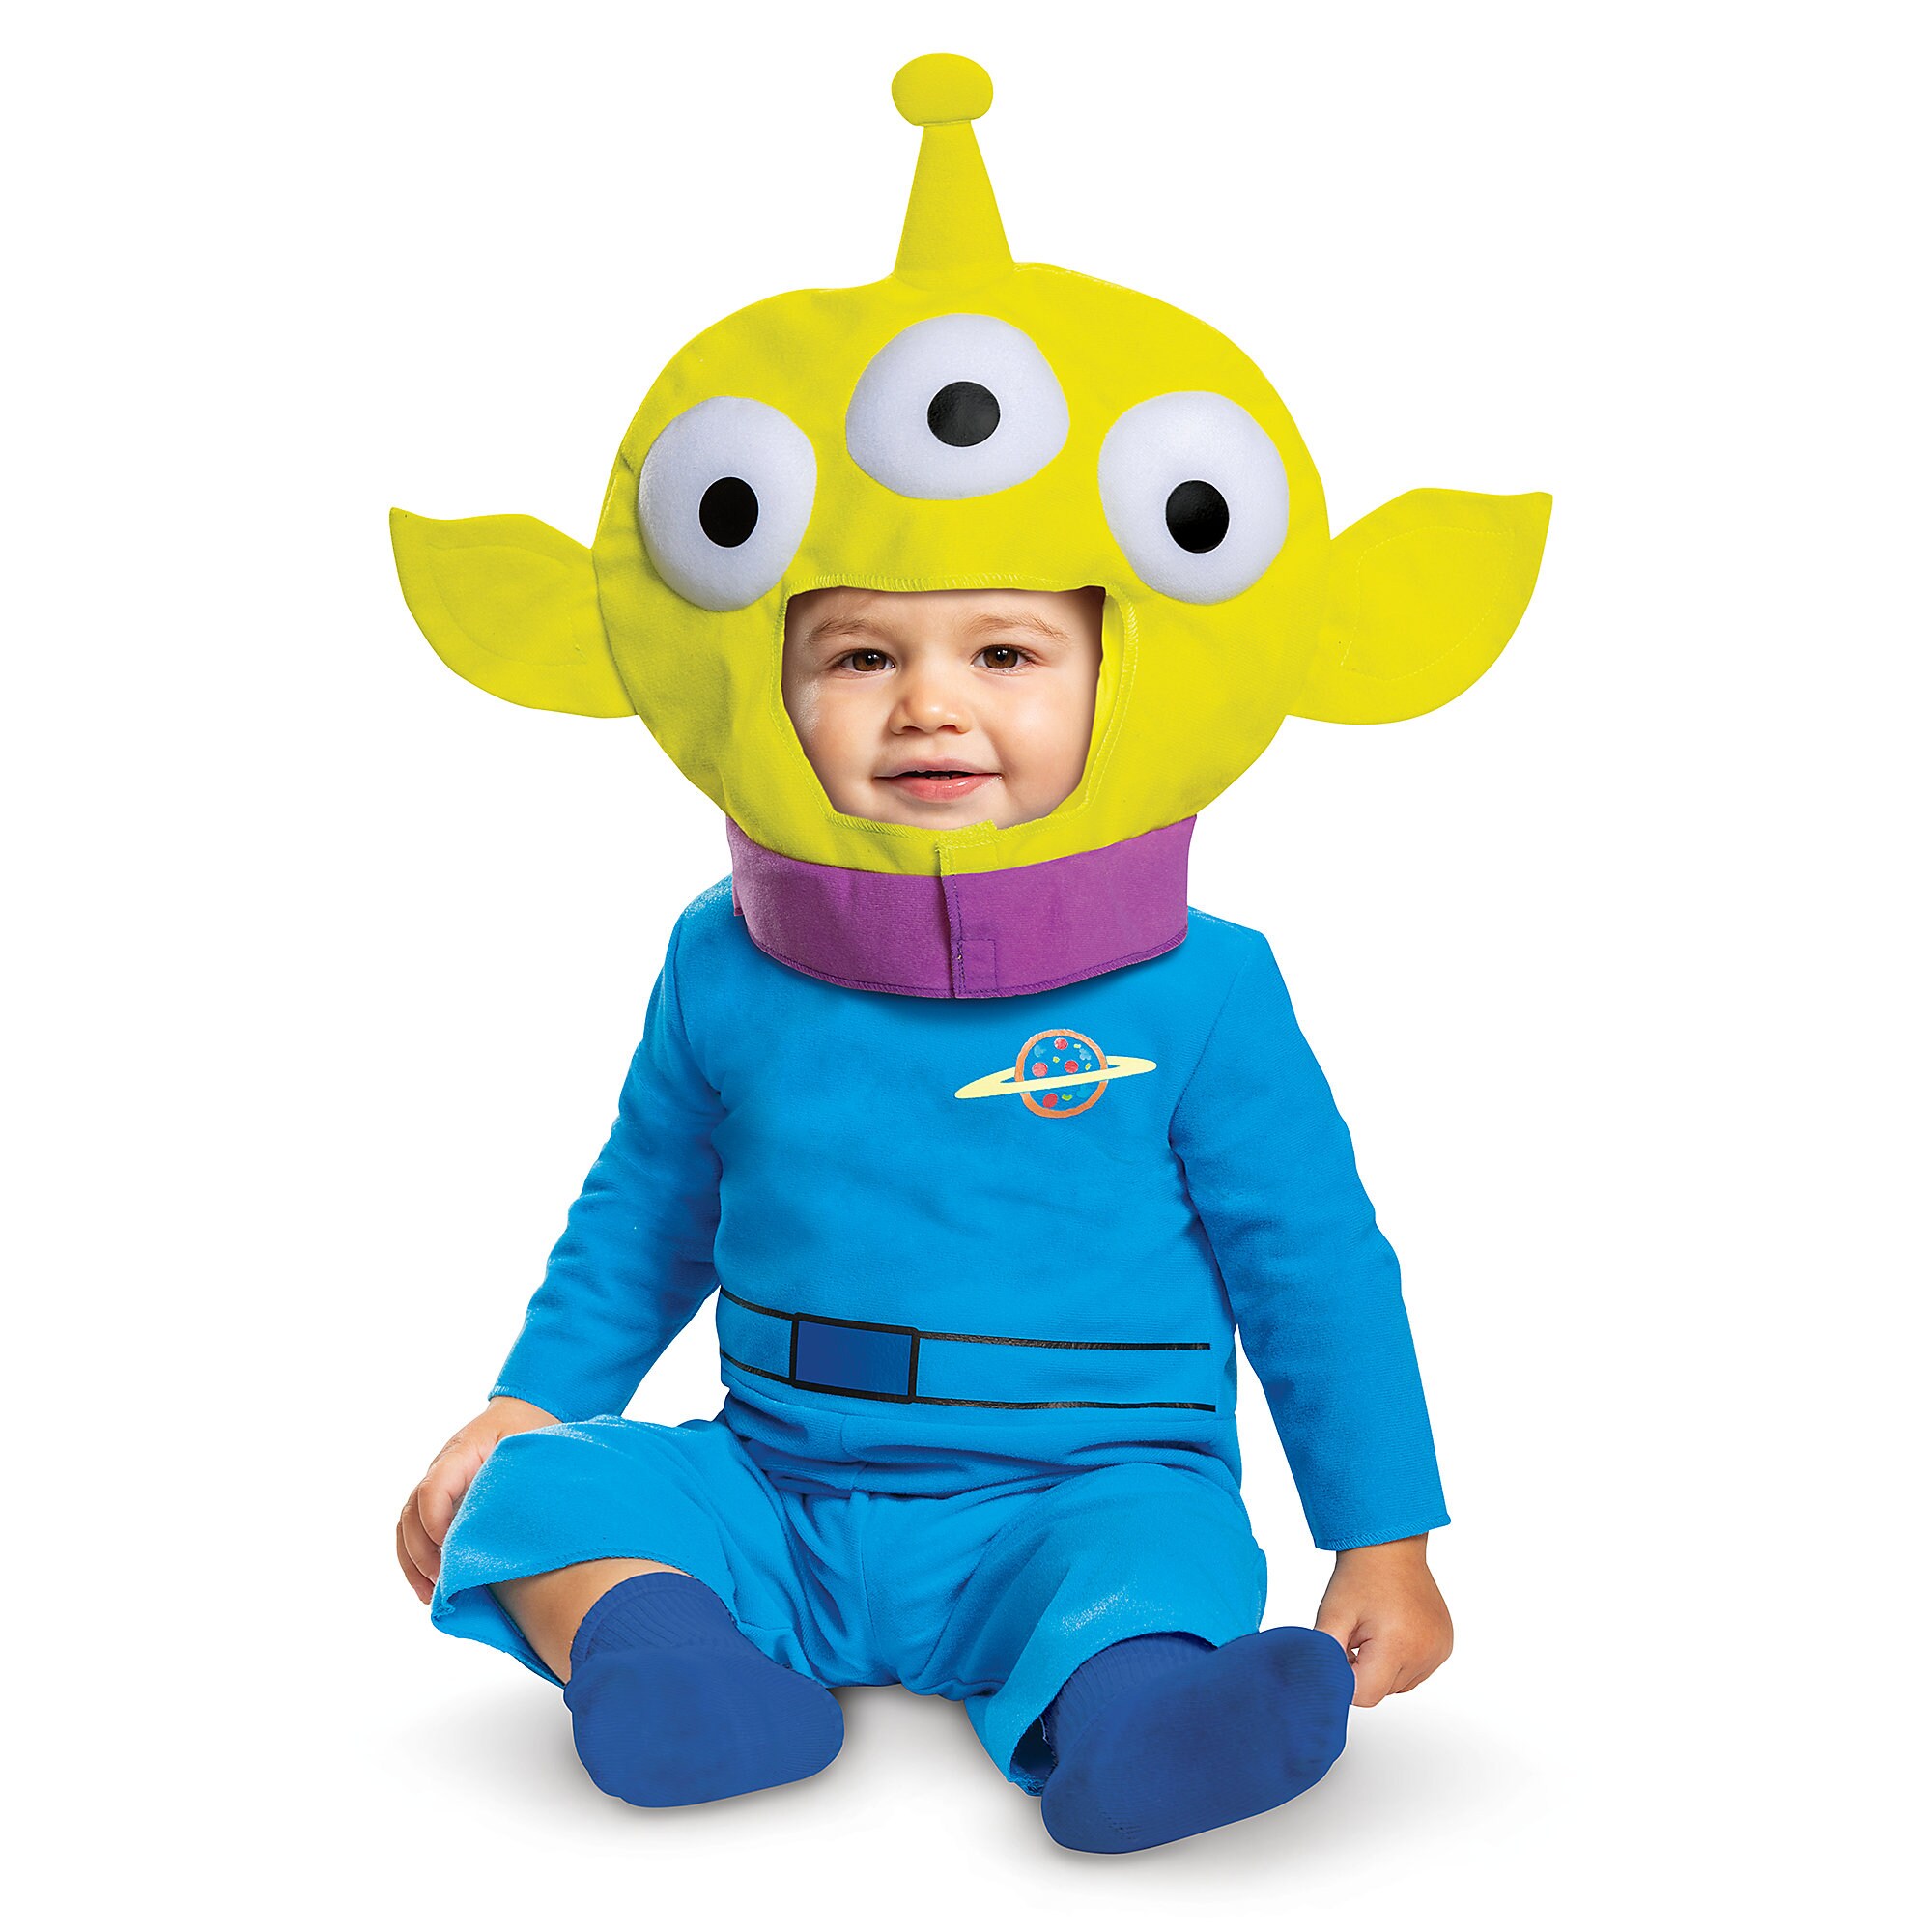 Alien Costume for Baby by Disguise - Toy Story